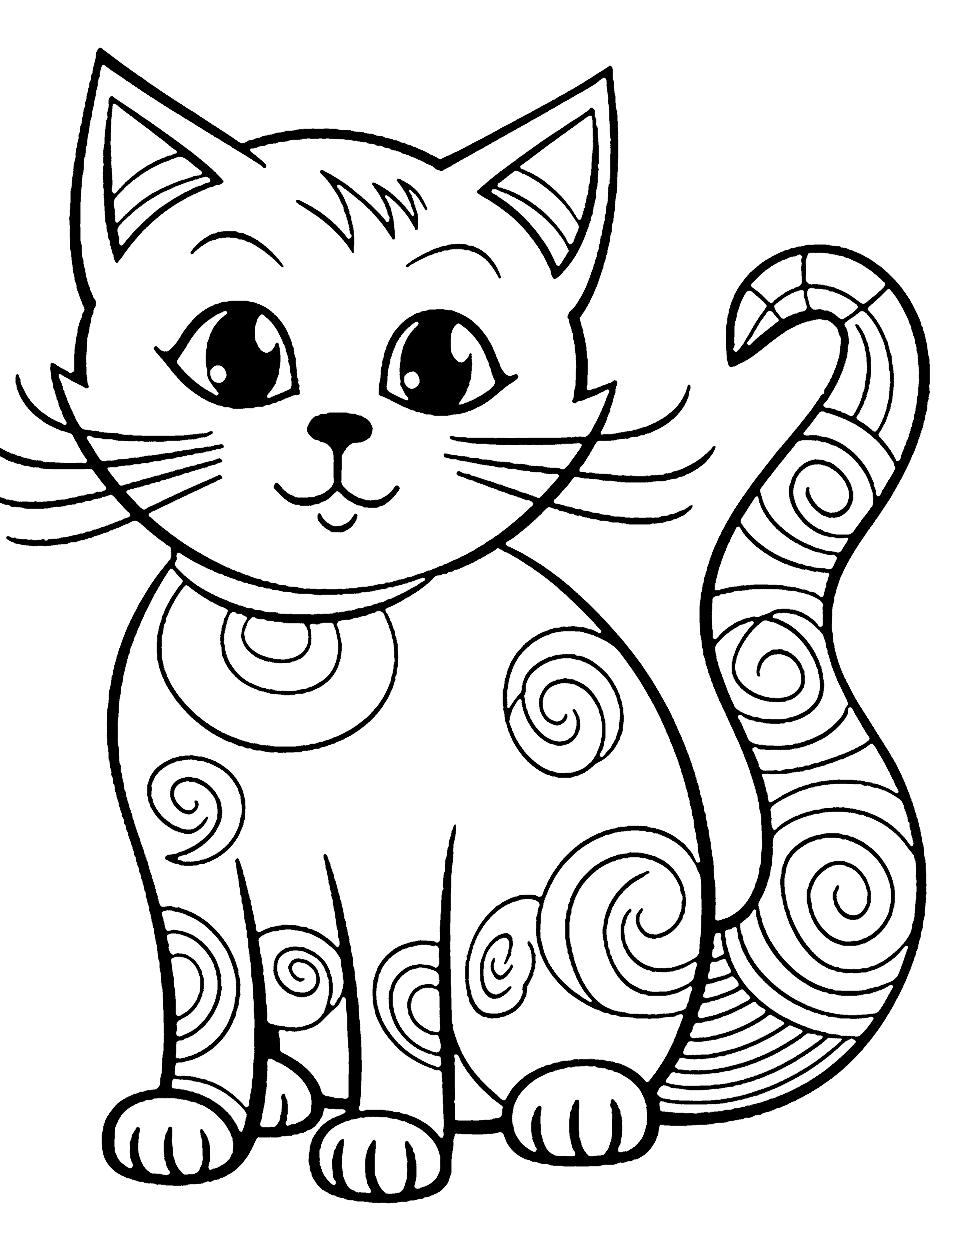 Doodle-Style Cat Cute Coloring Page - A cat drawn in a doodle style with playful patterns and shapes.